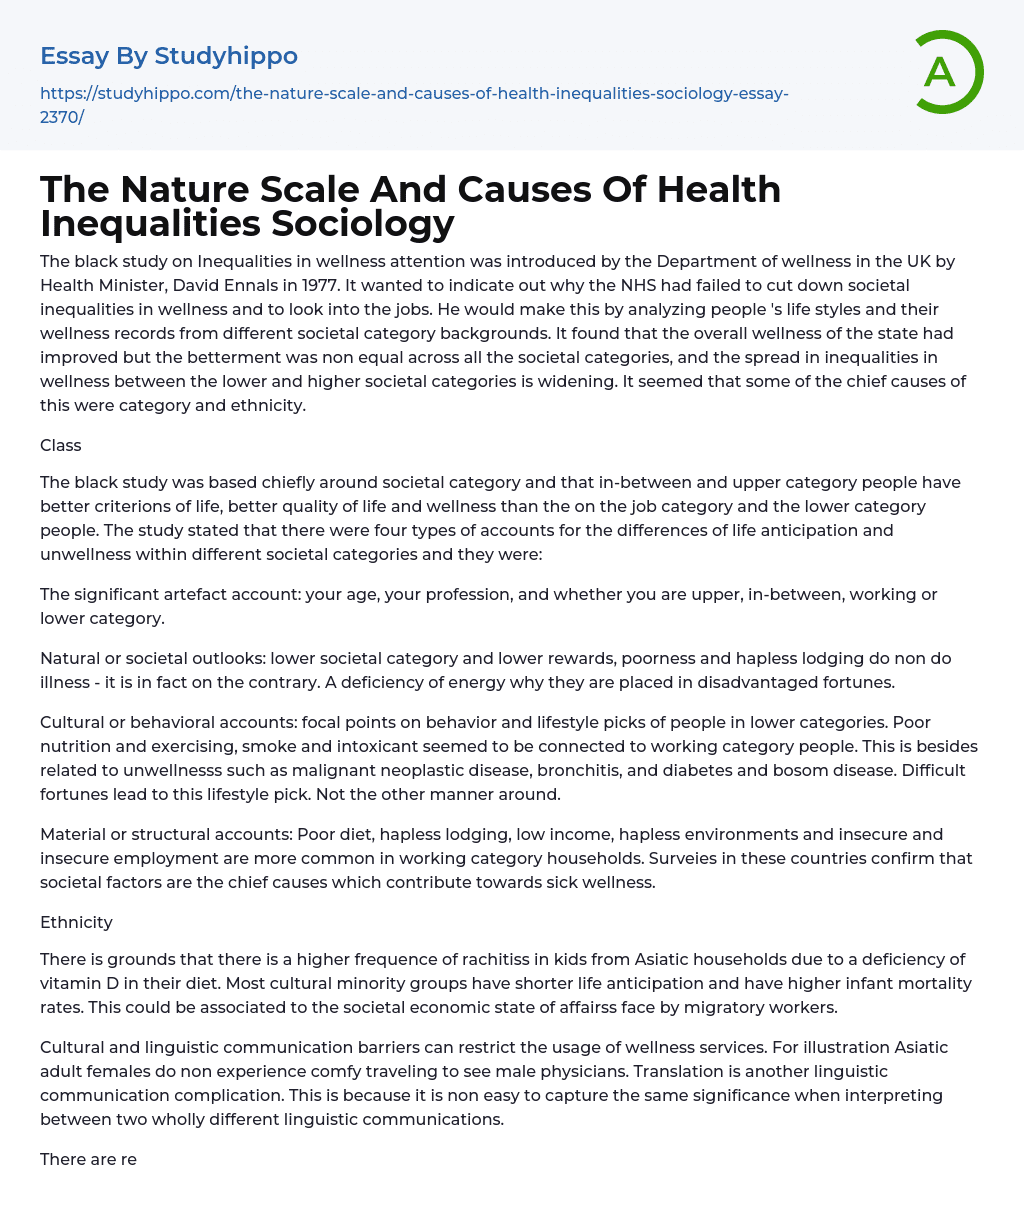 The Nature Scale And Causes Of Health Inequalities Sociology